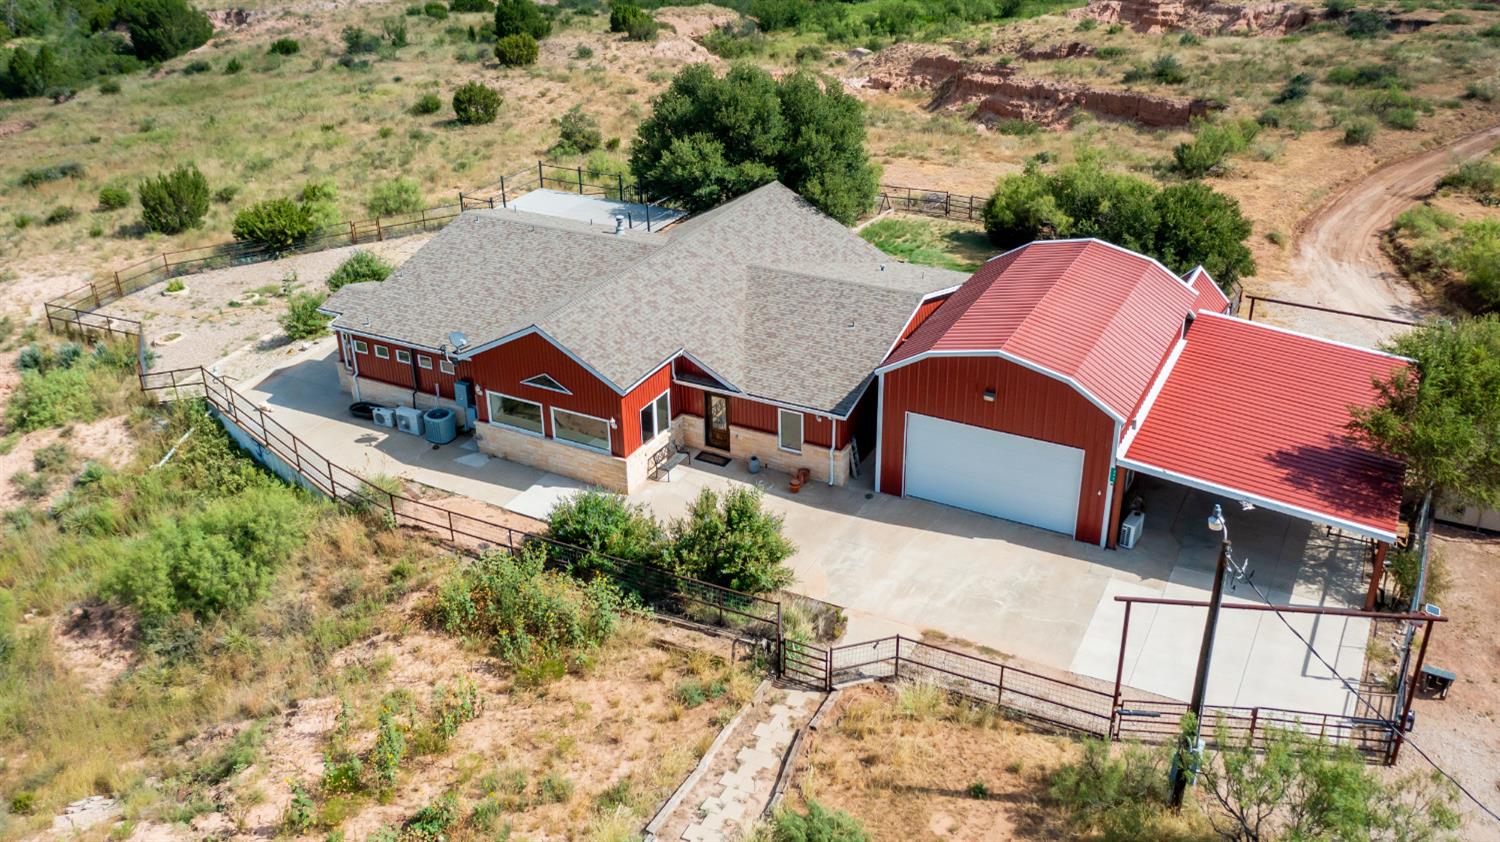 $25K Price Improvement. Welcome to Sand Creek Ranch, an exclusive gated community with just under 1,000 shared acres to enjoy hiking, biking, swimming, & ATV trails. Perfect weekend getaway & only 30 minutes from Texas Tech & medical district. With only 13 members, each member is allowed 2 cows or horses if you wish to own, it is rare for a home like this to come available in this spectacular oasis with incredible views near Lubbock, Texas. 4 a/c units in home to allow zone temperature controls. Main house is one level (handicap friendly). 10-day backup water supply-550 gallon maintains-60 PSI. Fiber internet with 1GB speed. Primary bedroom has separate his & her private bathrooms & closets. Perfect living area for entertaining large numbers of guests with a huge flex room;  can be an office or media room with wet bar & fabulous views. Spacious gourmet chef's kitchen 2 islands open to living room with both casual & formal dining areas & breakfast bar seating overlooking canyon.